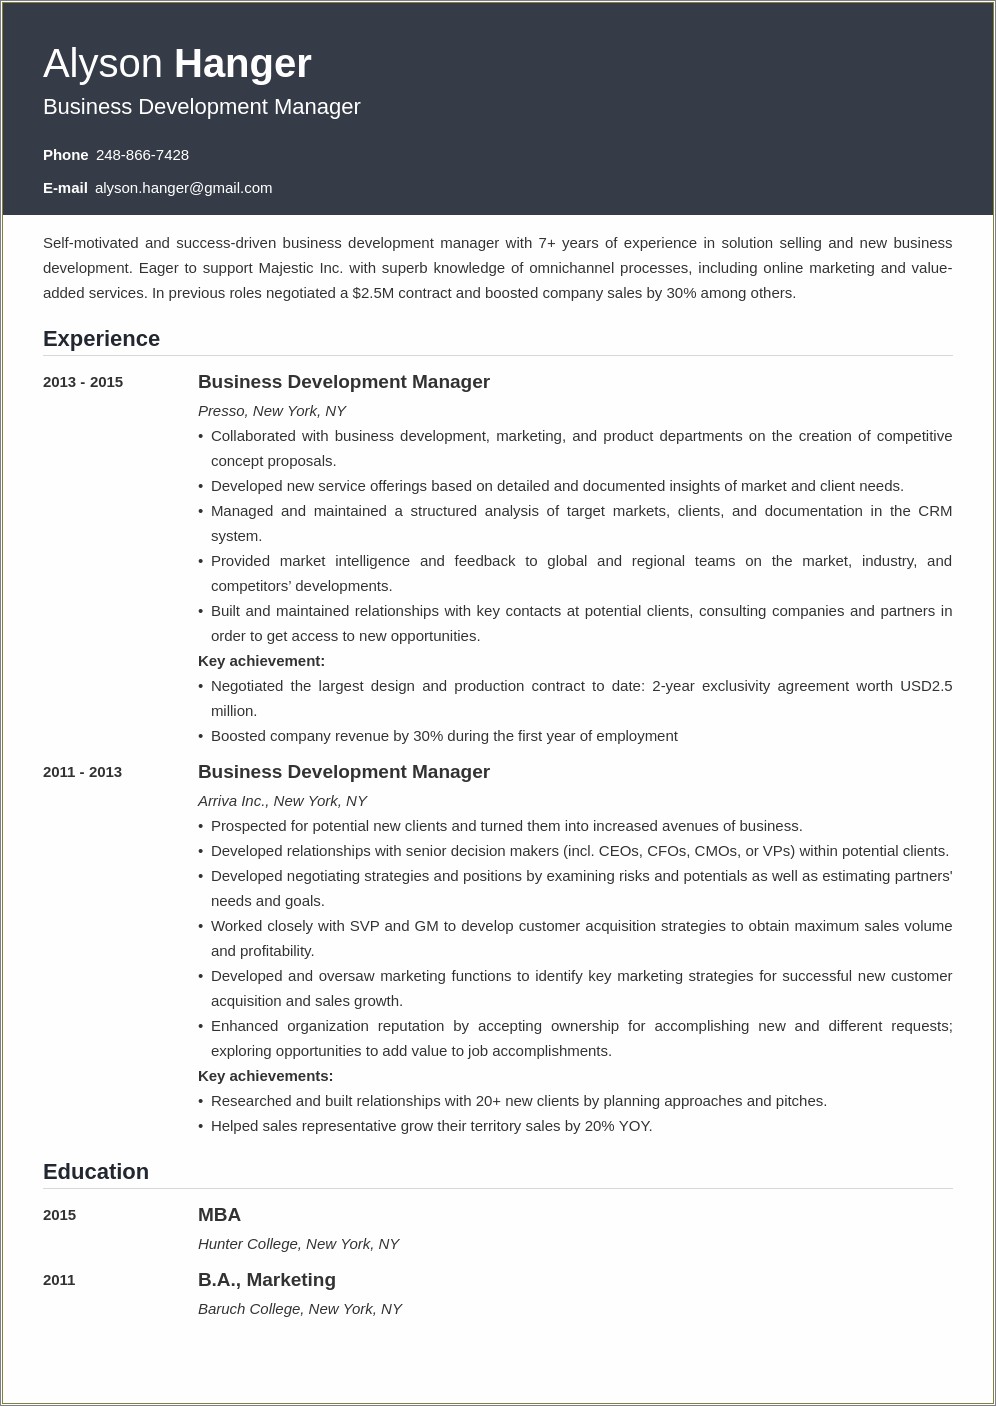 Resume Template For Business Development Manager